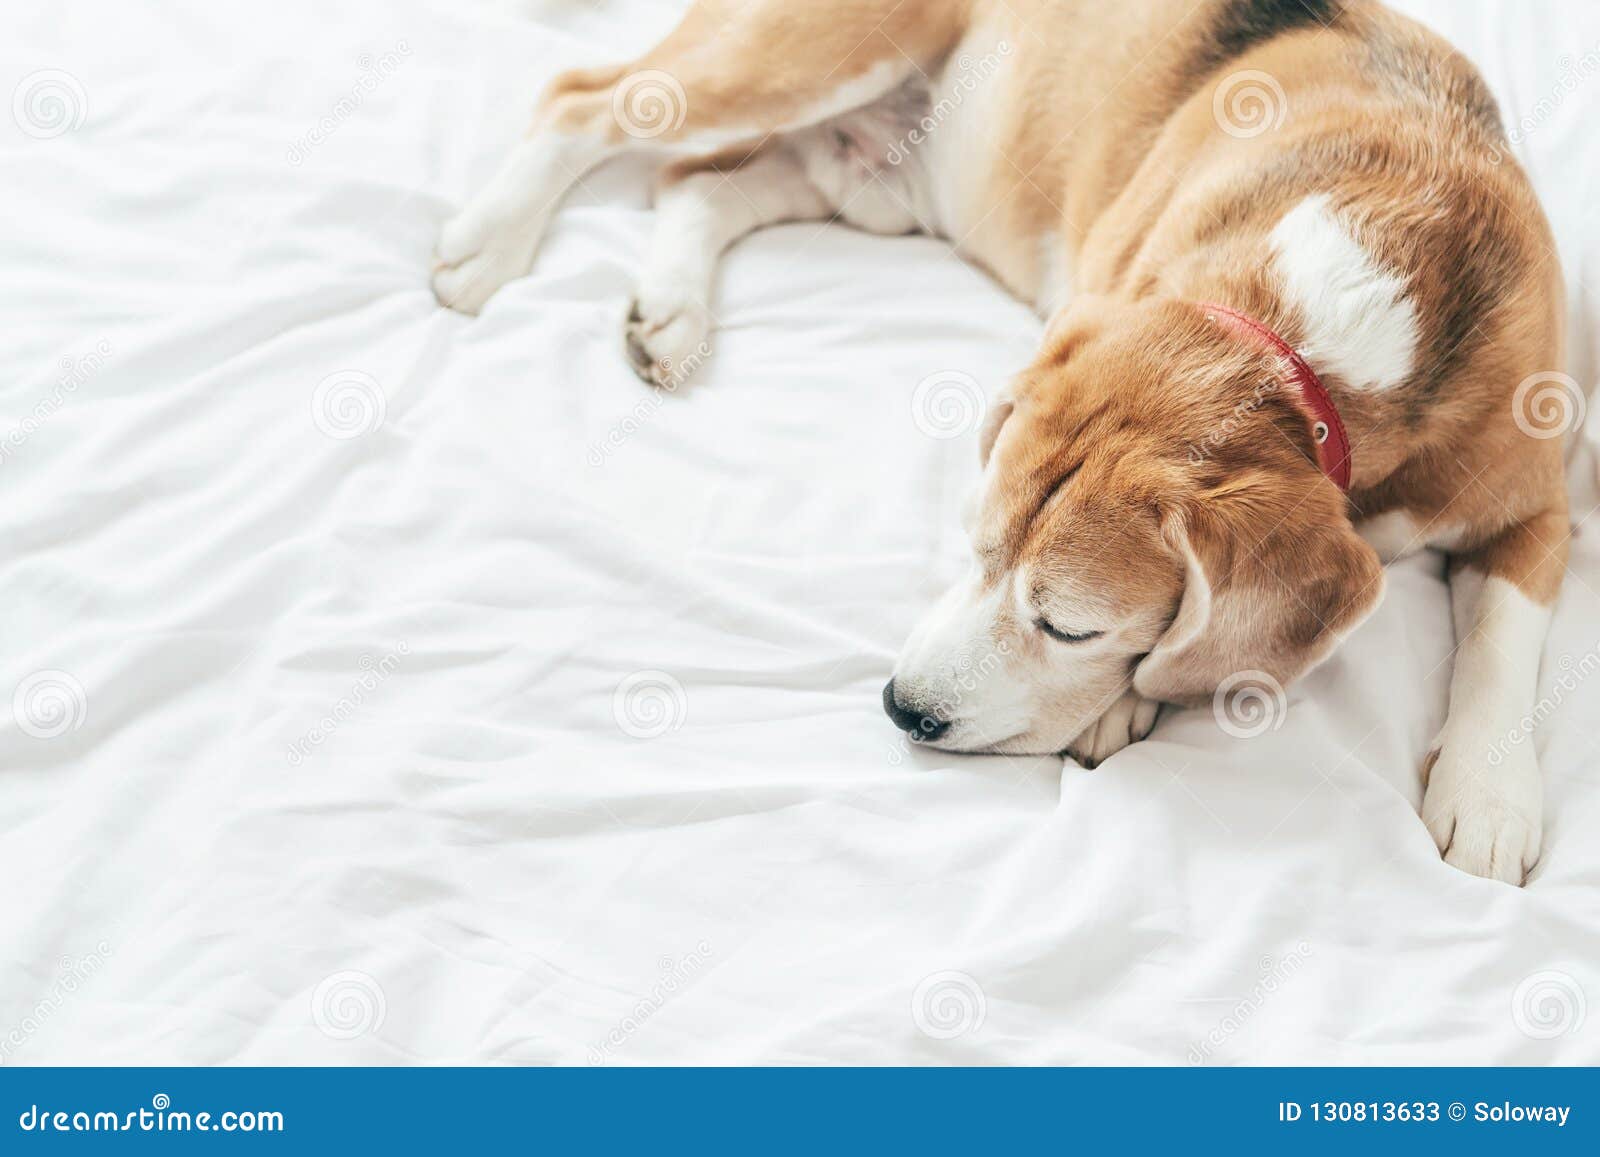 a top view of the beagle dog sleeps on the clear white bed sheet